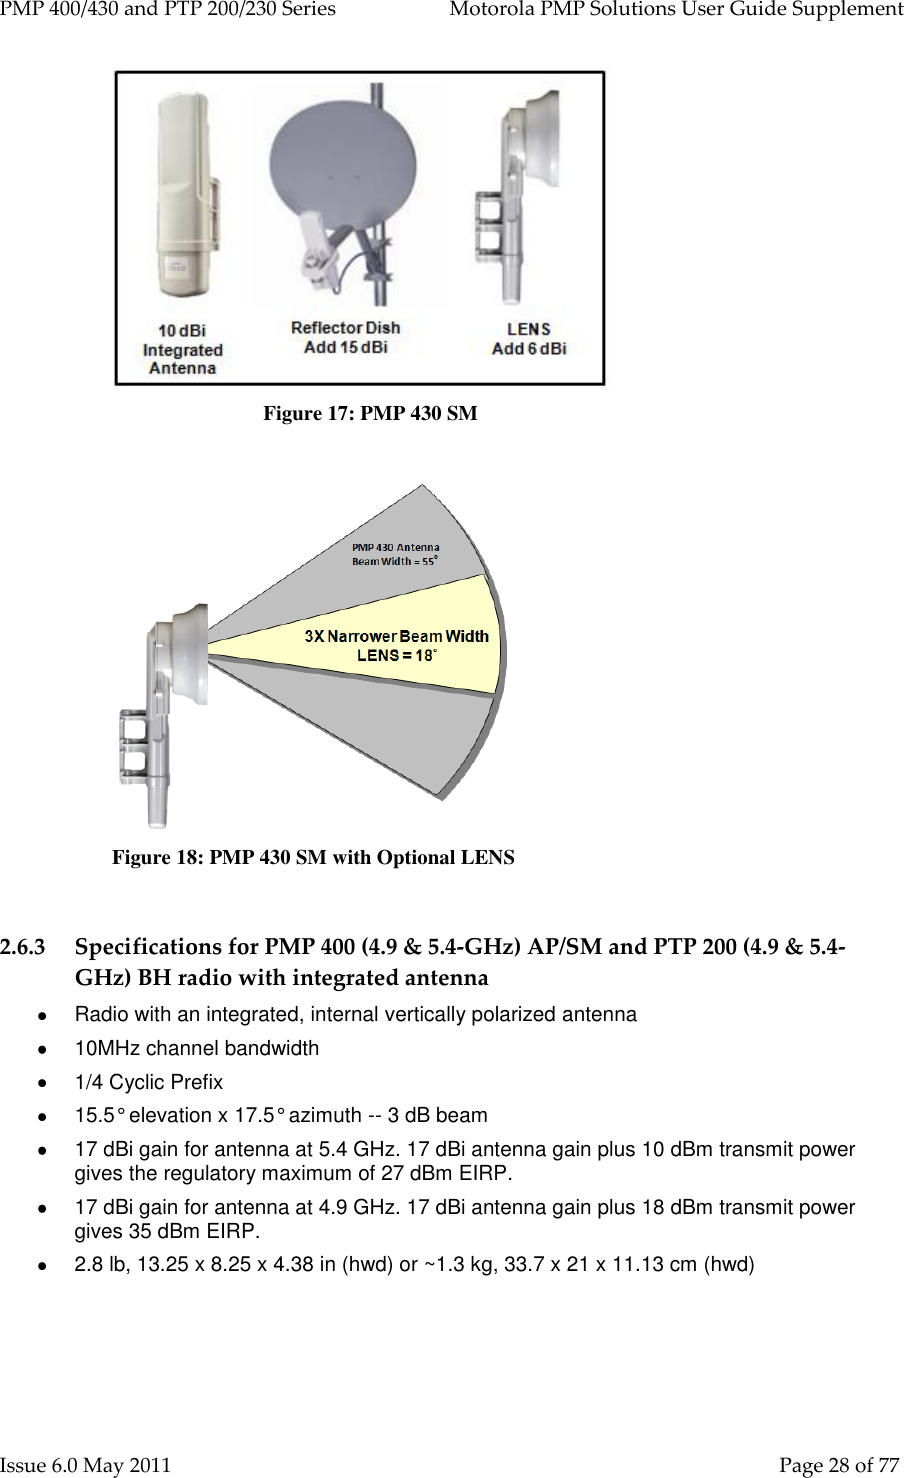 PMP 400/430 and PTP 200/230 Series   Motorola PMP Solutions User Guide Supplement Issue 6.0 May 2011    Page 28 of 77                               Figure 17: PMP 430 SM   Figure 18: PMP 430 SM with Optional LENS  2.6.3 Specifications for PMP 400 (4.9 &amp; 5.4-GHz) AP/SM and PTP 200 (4.9 &amp; 5.4-GHz) BH radio with integrated antenna   Radio with an integrated, internal vertically polarized antenna   10MHz channel bandwidth   1/4 Cyclic Prefix   15.5° elevation x 17.5° azimuth -- 3 dB beam   17 dBi gain for antenna at 5.4 GHz. 17 dBi antenna gain plus 10 dBm transmit power gives the regulatory maximum of 27 dBm EIRP.   17 dBi gain for antenna at 4.9 GHz. 17 dBi antenna gain plus 18 dBm transmit power gives 35 dBm EIRP.   2.8 lb, 13.25 x 8.25 x 4.38 in (hwd) or ~1.3 kg, 33.7 x 21 x 11.13 cm (hwd) 